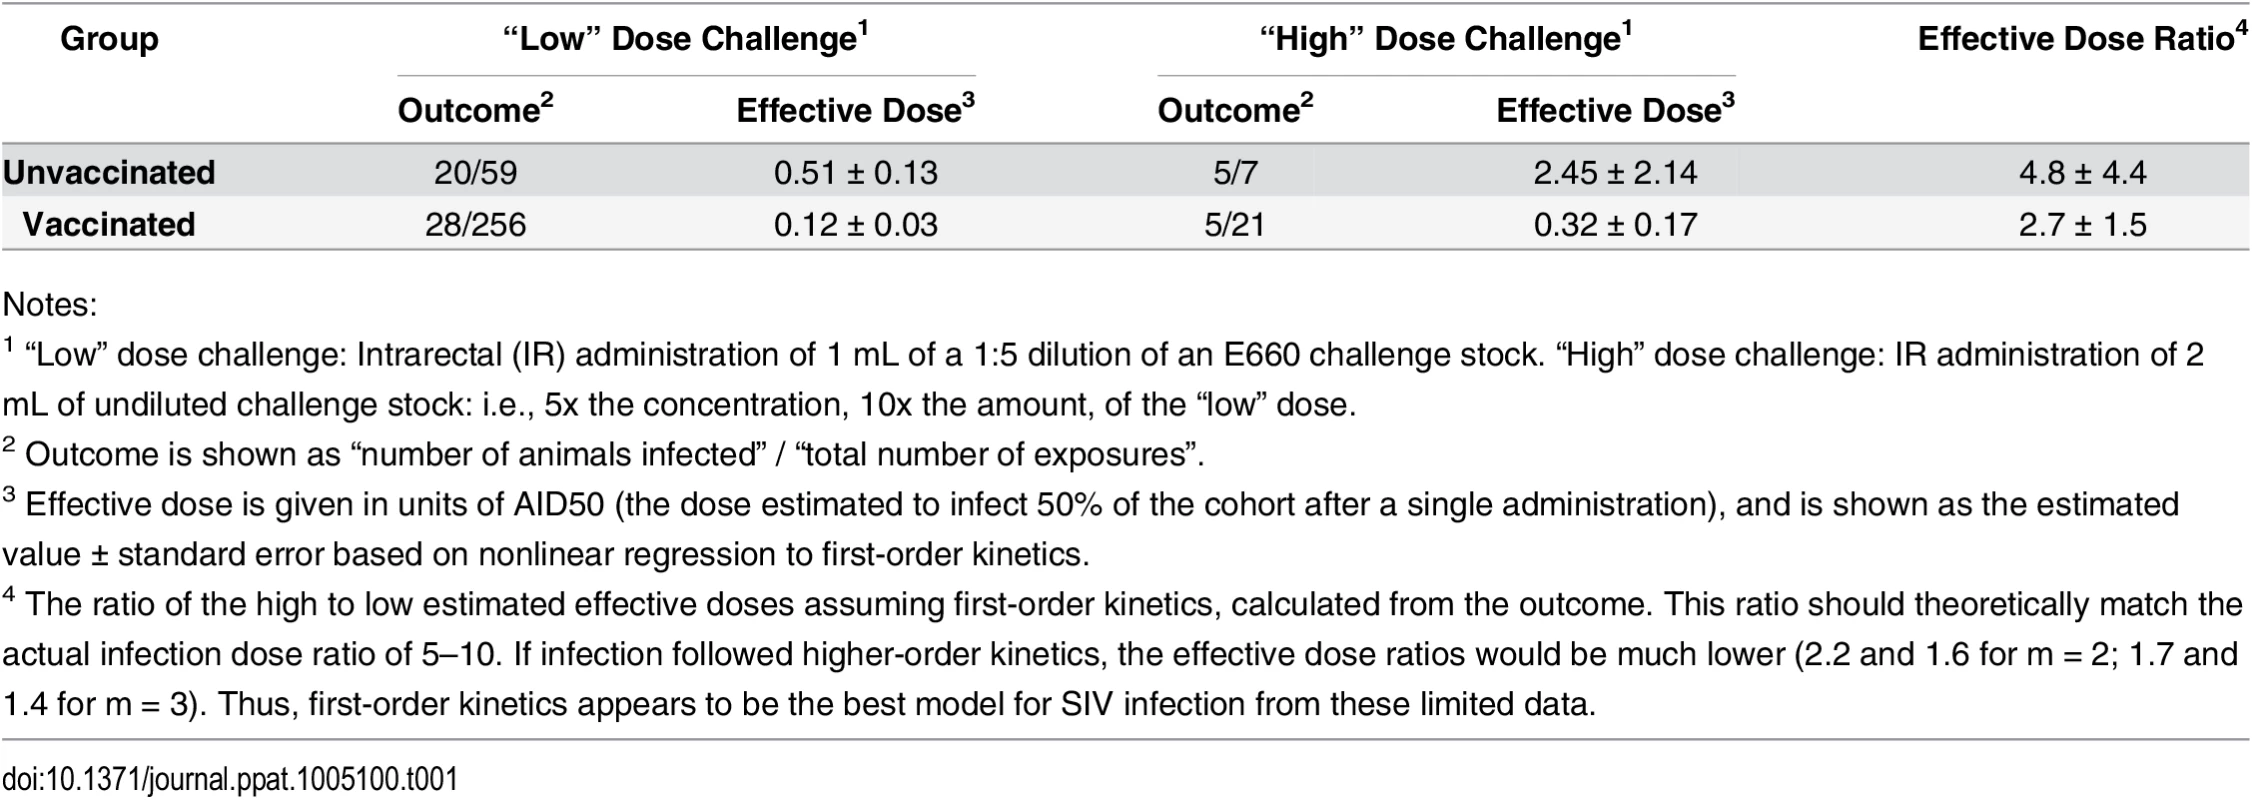 SIV challenge dose impact on infection rate.